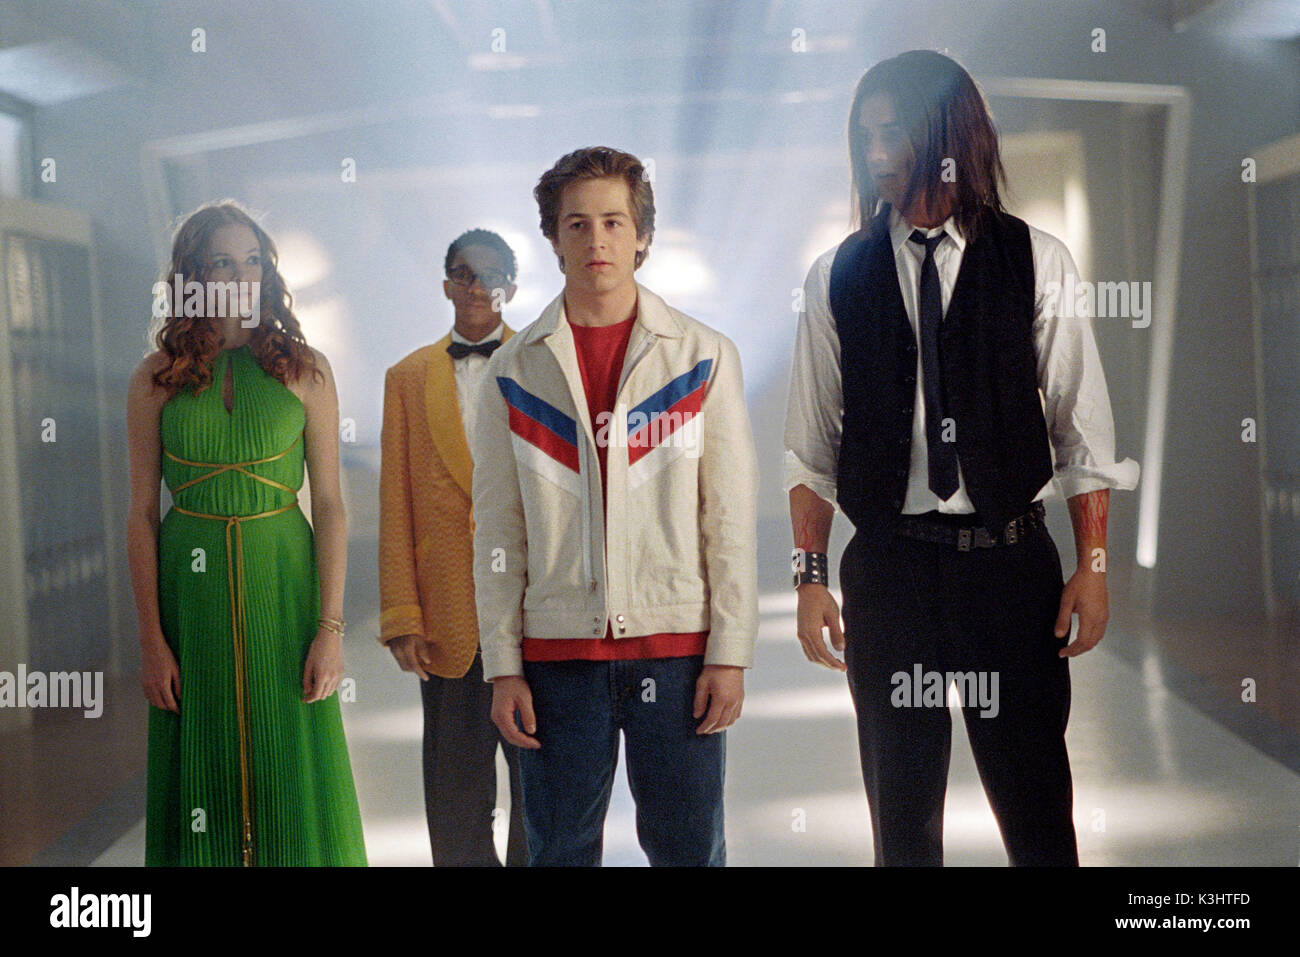 Pictured l-r: Layla (DANIELLE PANABAKER), Ethan (DEE JAY DANIELS), Will Stronghold (MICHAEL ANGARANO), and Warren Peace (STEVEN STRAIT) in a scene from SKY HIGH, a new comedy from Walt Disney Pictures, directed by Mike Mitchell.       Distributed by Buena Vista International. THIS MATERIAL MAY BE LAWFULLY USED IN ALL MEDIA ONLY TO PROMOTE THE RELEASE OF THE MOTION PICTURE ENTITLED SKY HIGH DURING THE PICTURE'S PROMOTIONAL WINDOWS. ANY OTHER USE, RE-USE, DUPLICATION OR POSTING OF THIS MATERIAL IS STRICTLY PROHIBITED WITHOUT THE EXPRESS WRITTEN CONSENT OF WALT DISNEY PICTURES. AND CO Stock Photo